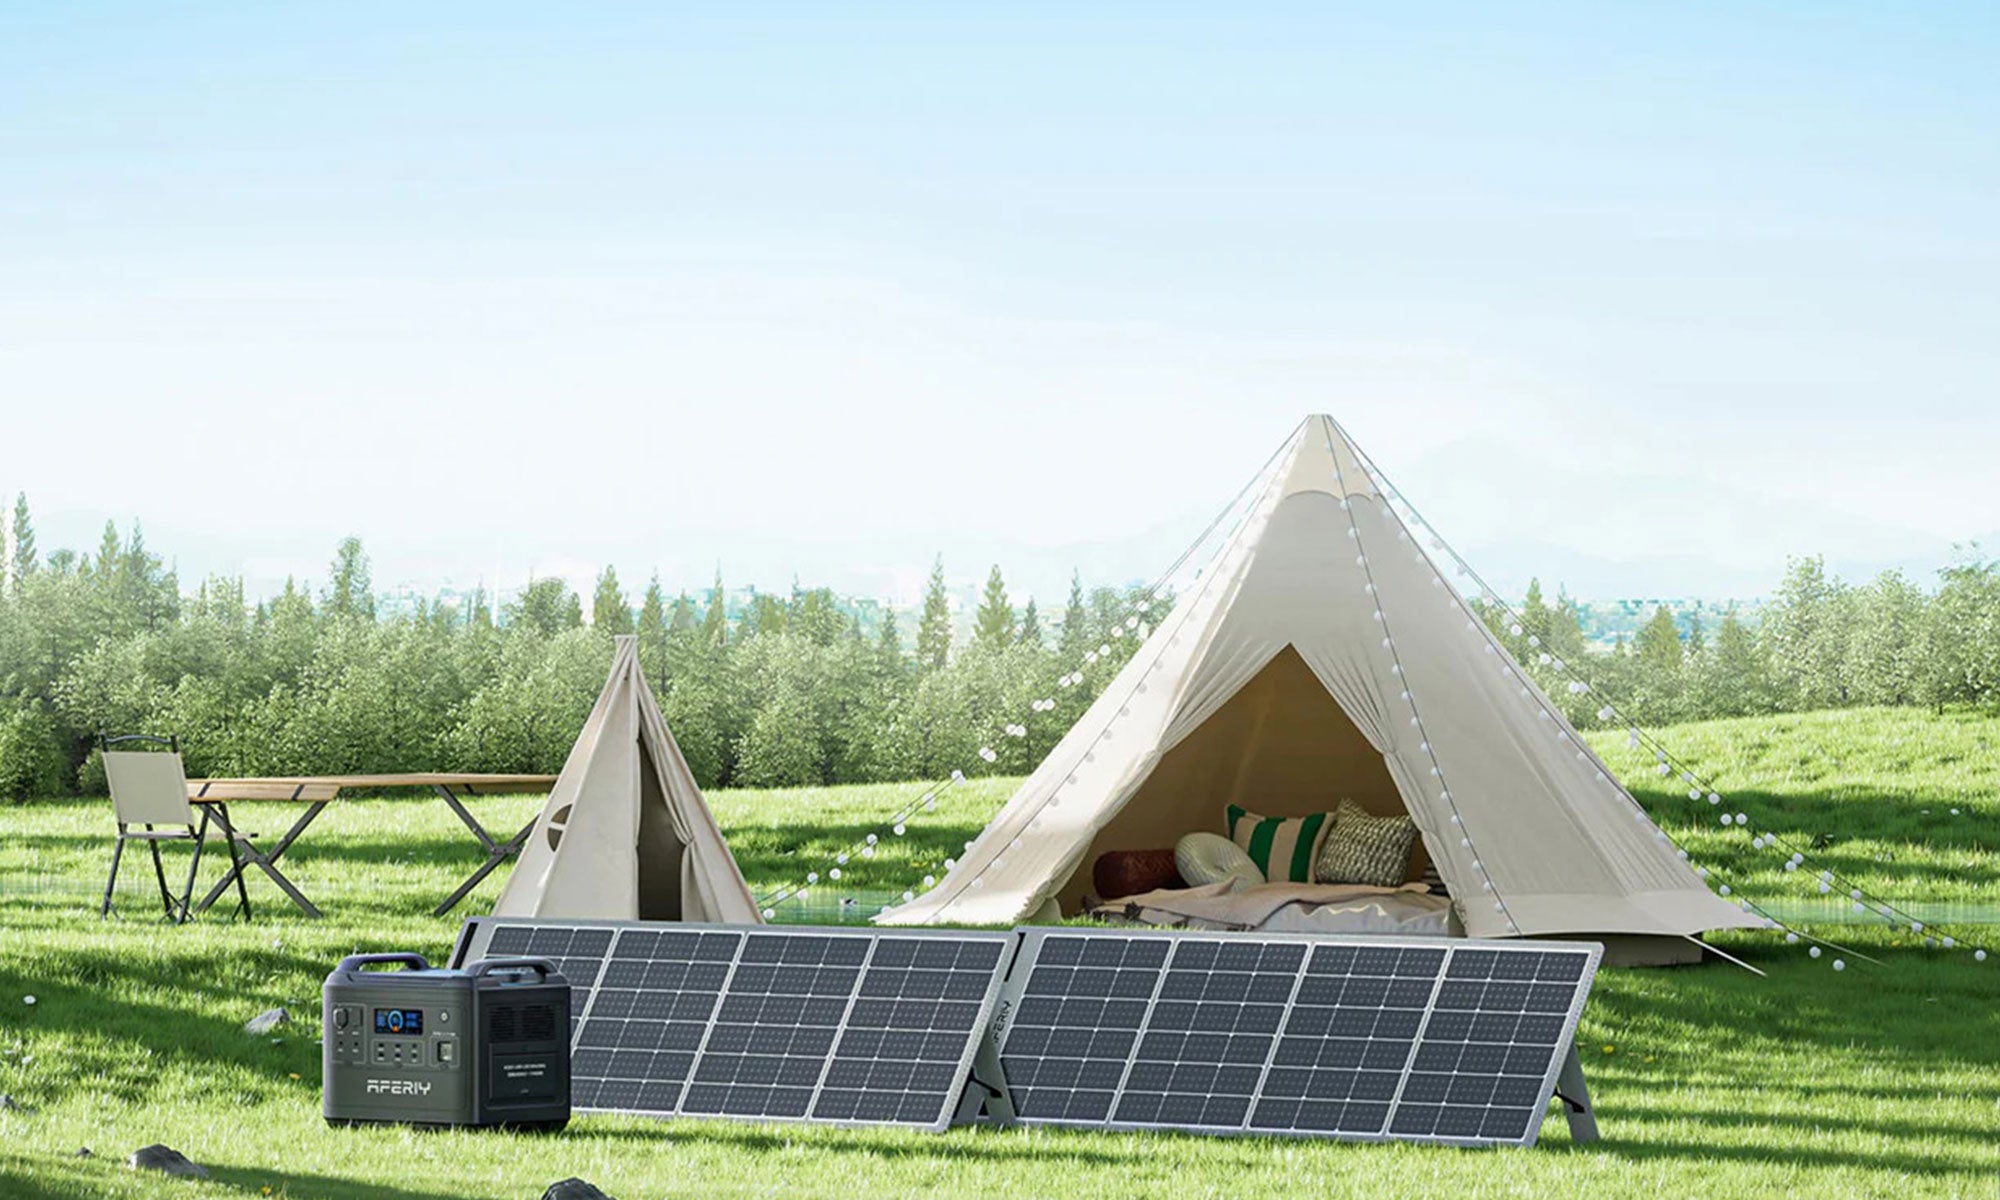 Aferiy Solar Generator Is Clean and Eco-friendly